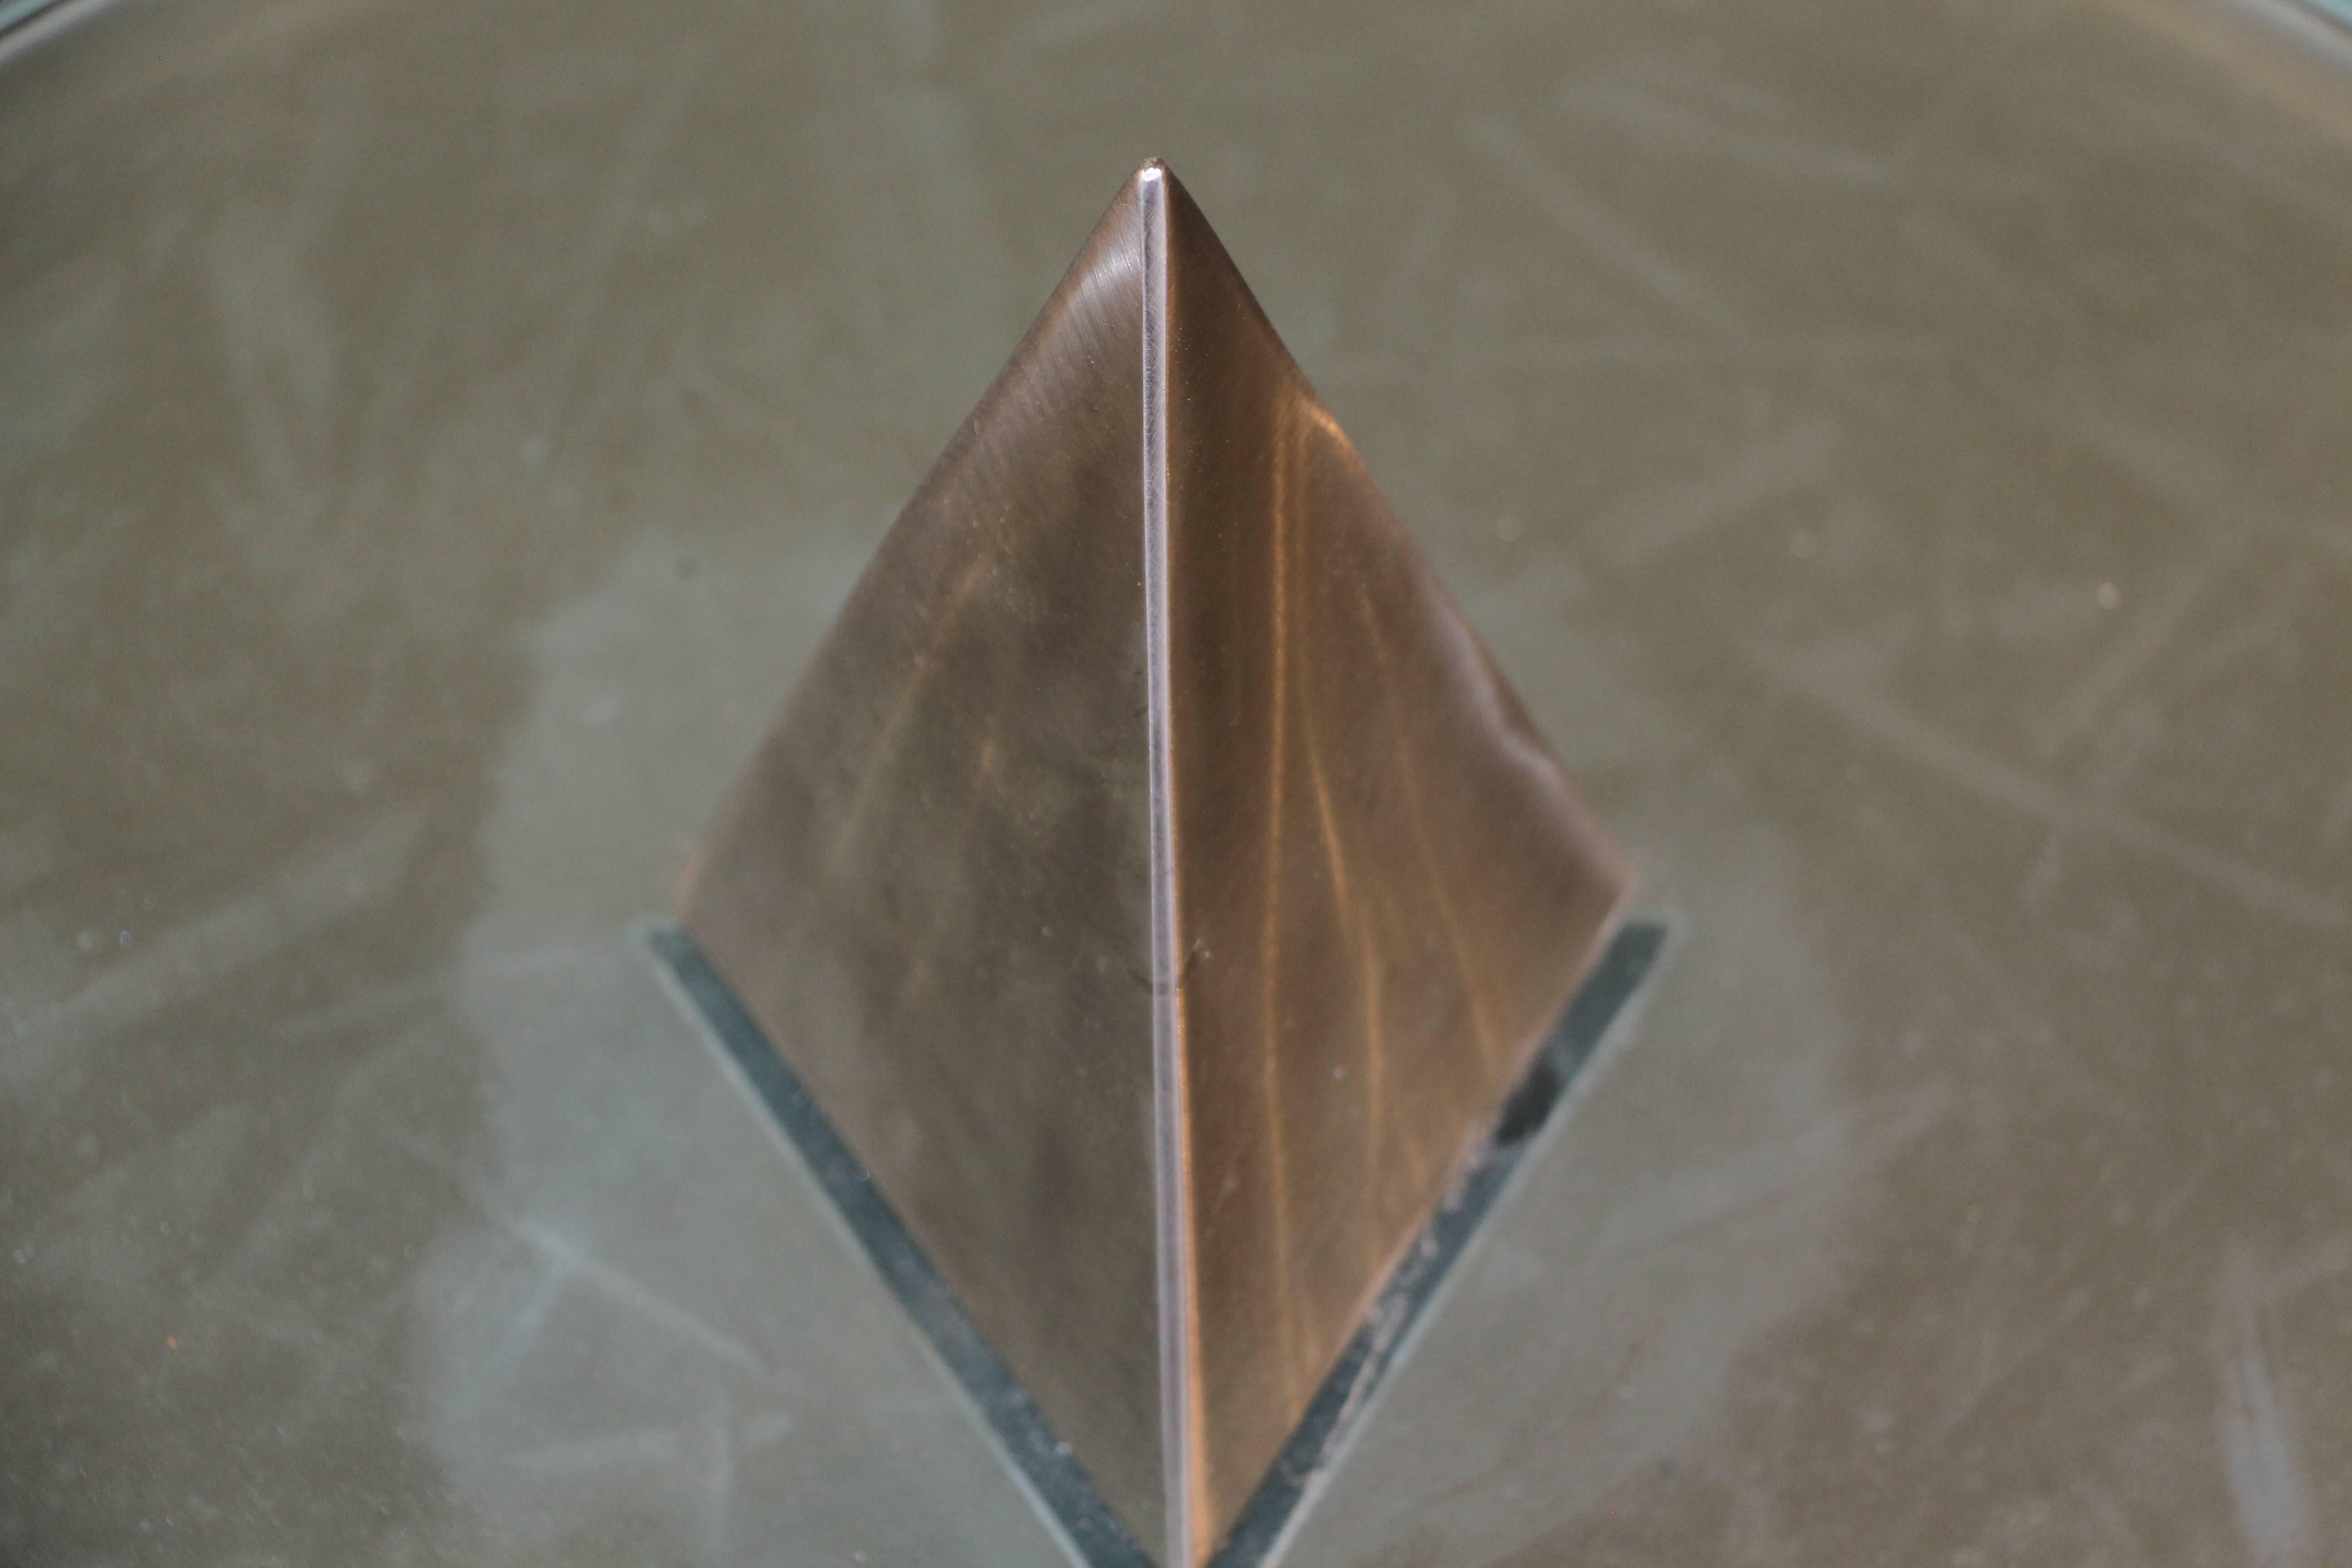 A most unusual table sculpture that is lightly unique and lights up, please see the detailed image of it lit. The triangle is slightly off, indicating it must have been put together by hand. The frosted glass is smooth on the top and etched lightly